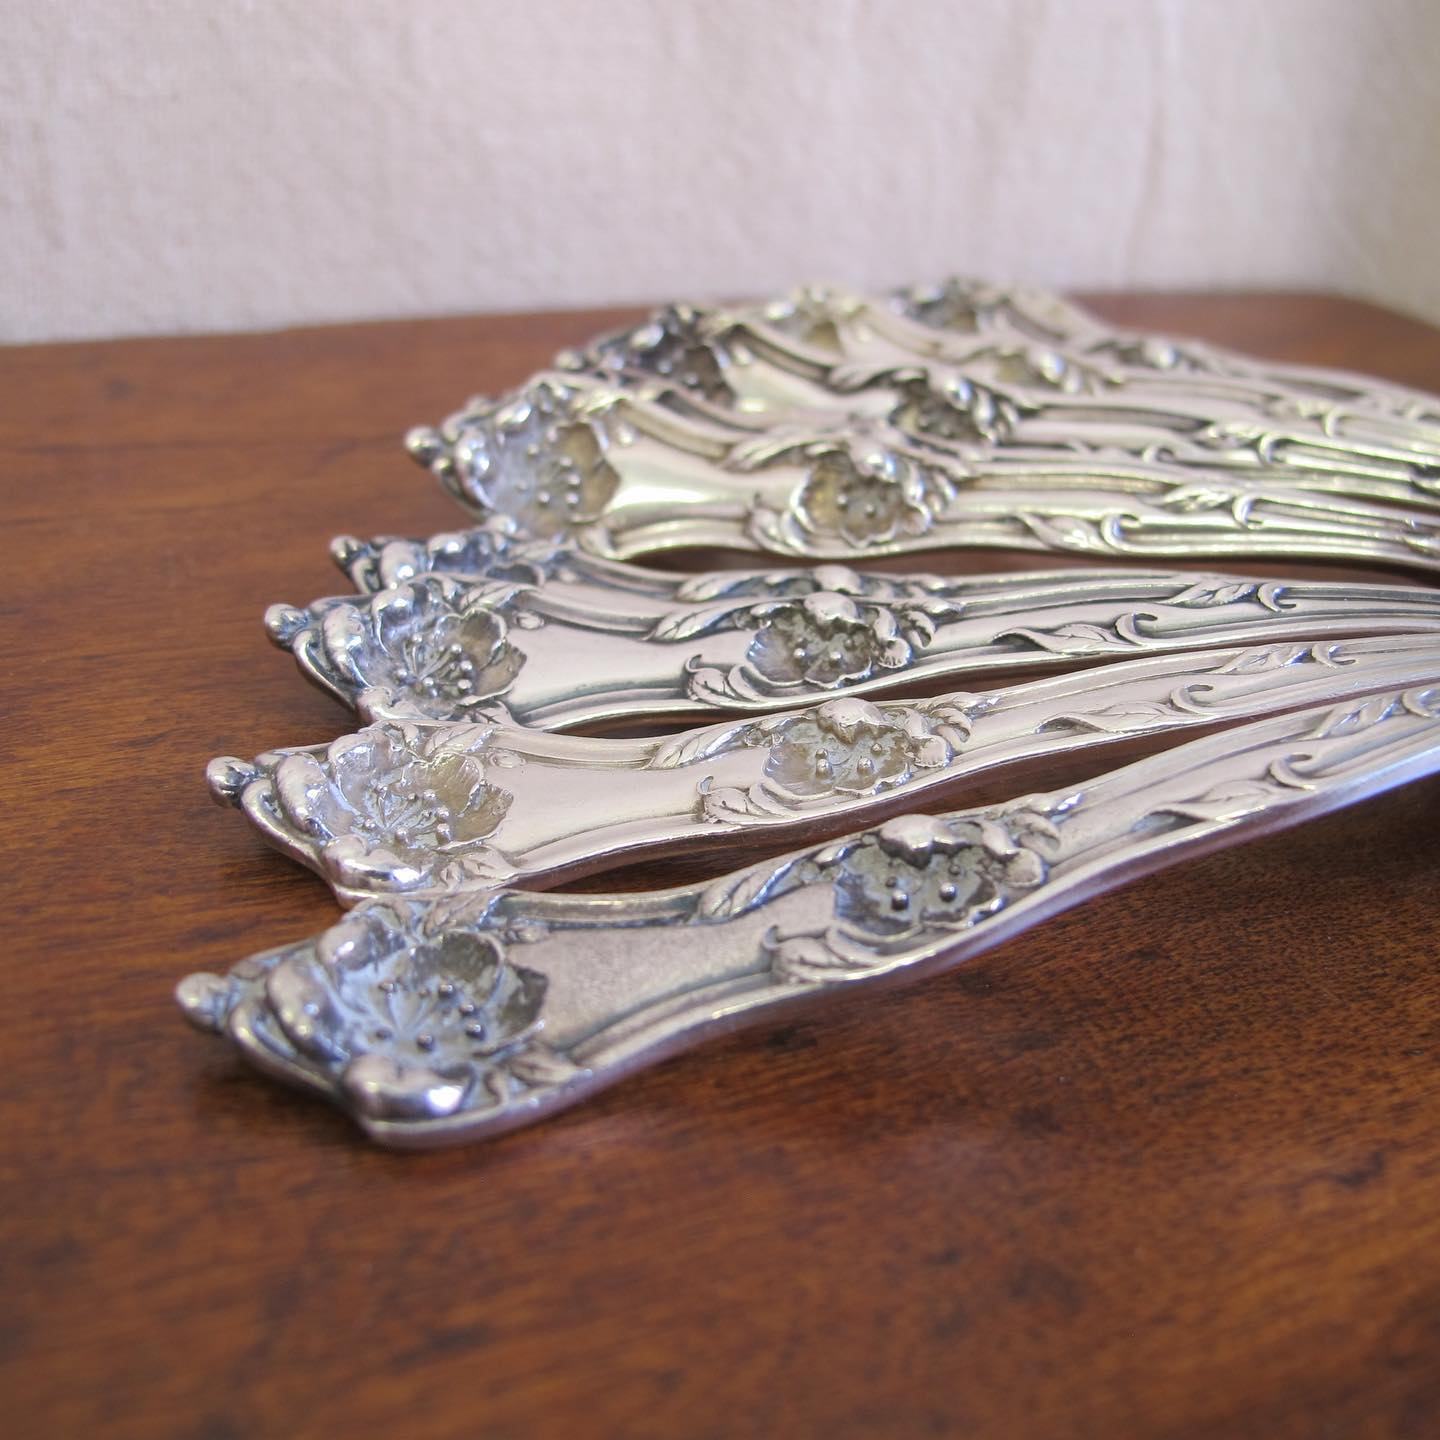 Ten Art Nouveau sterling silver Reed & Barton teaspoons, c. 1900, ‘Poppies’ pattern or possibly the ‘Les 5 Fleurs'